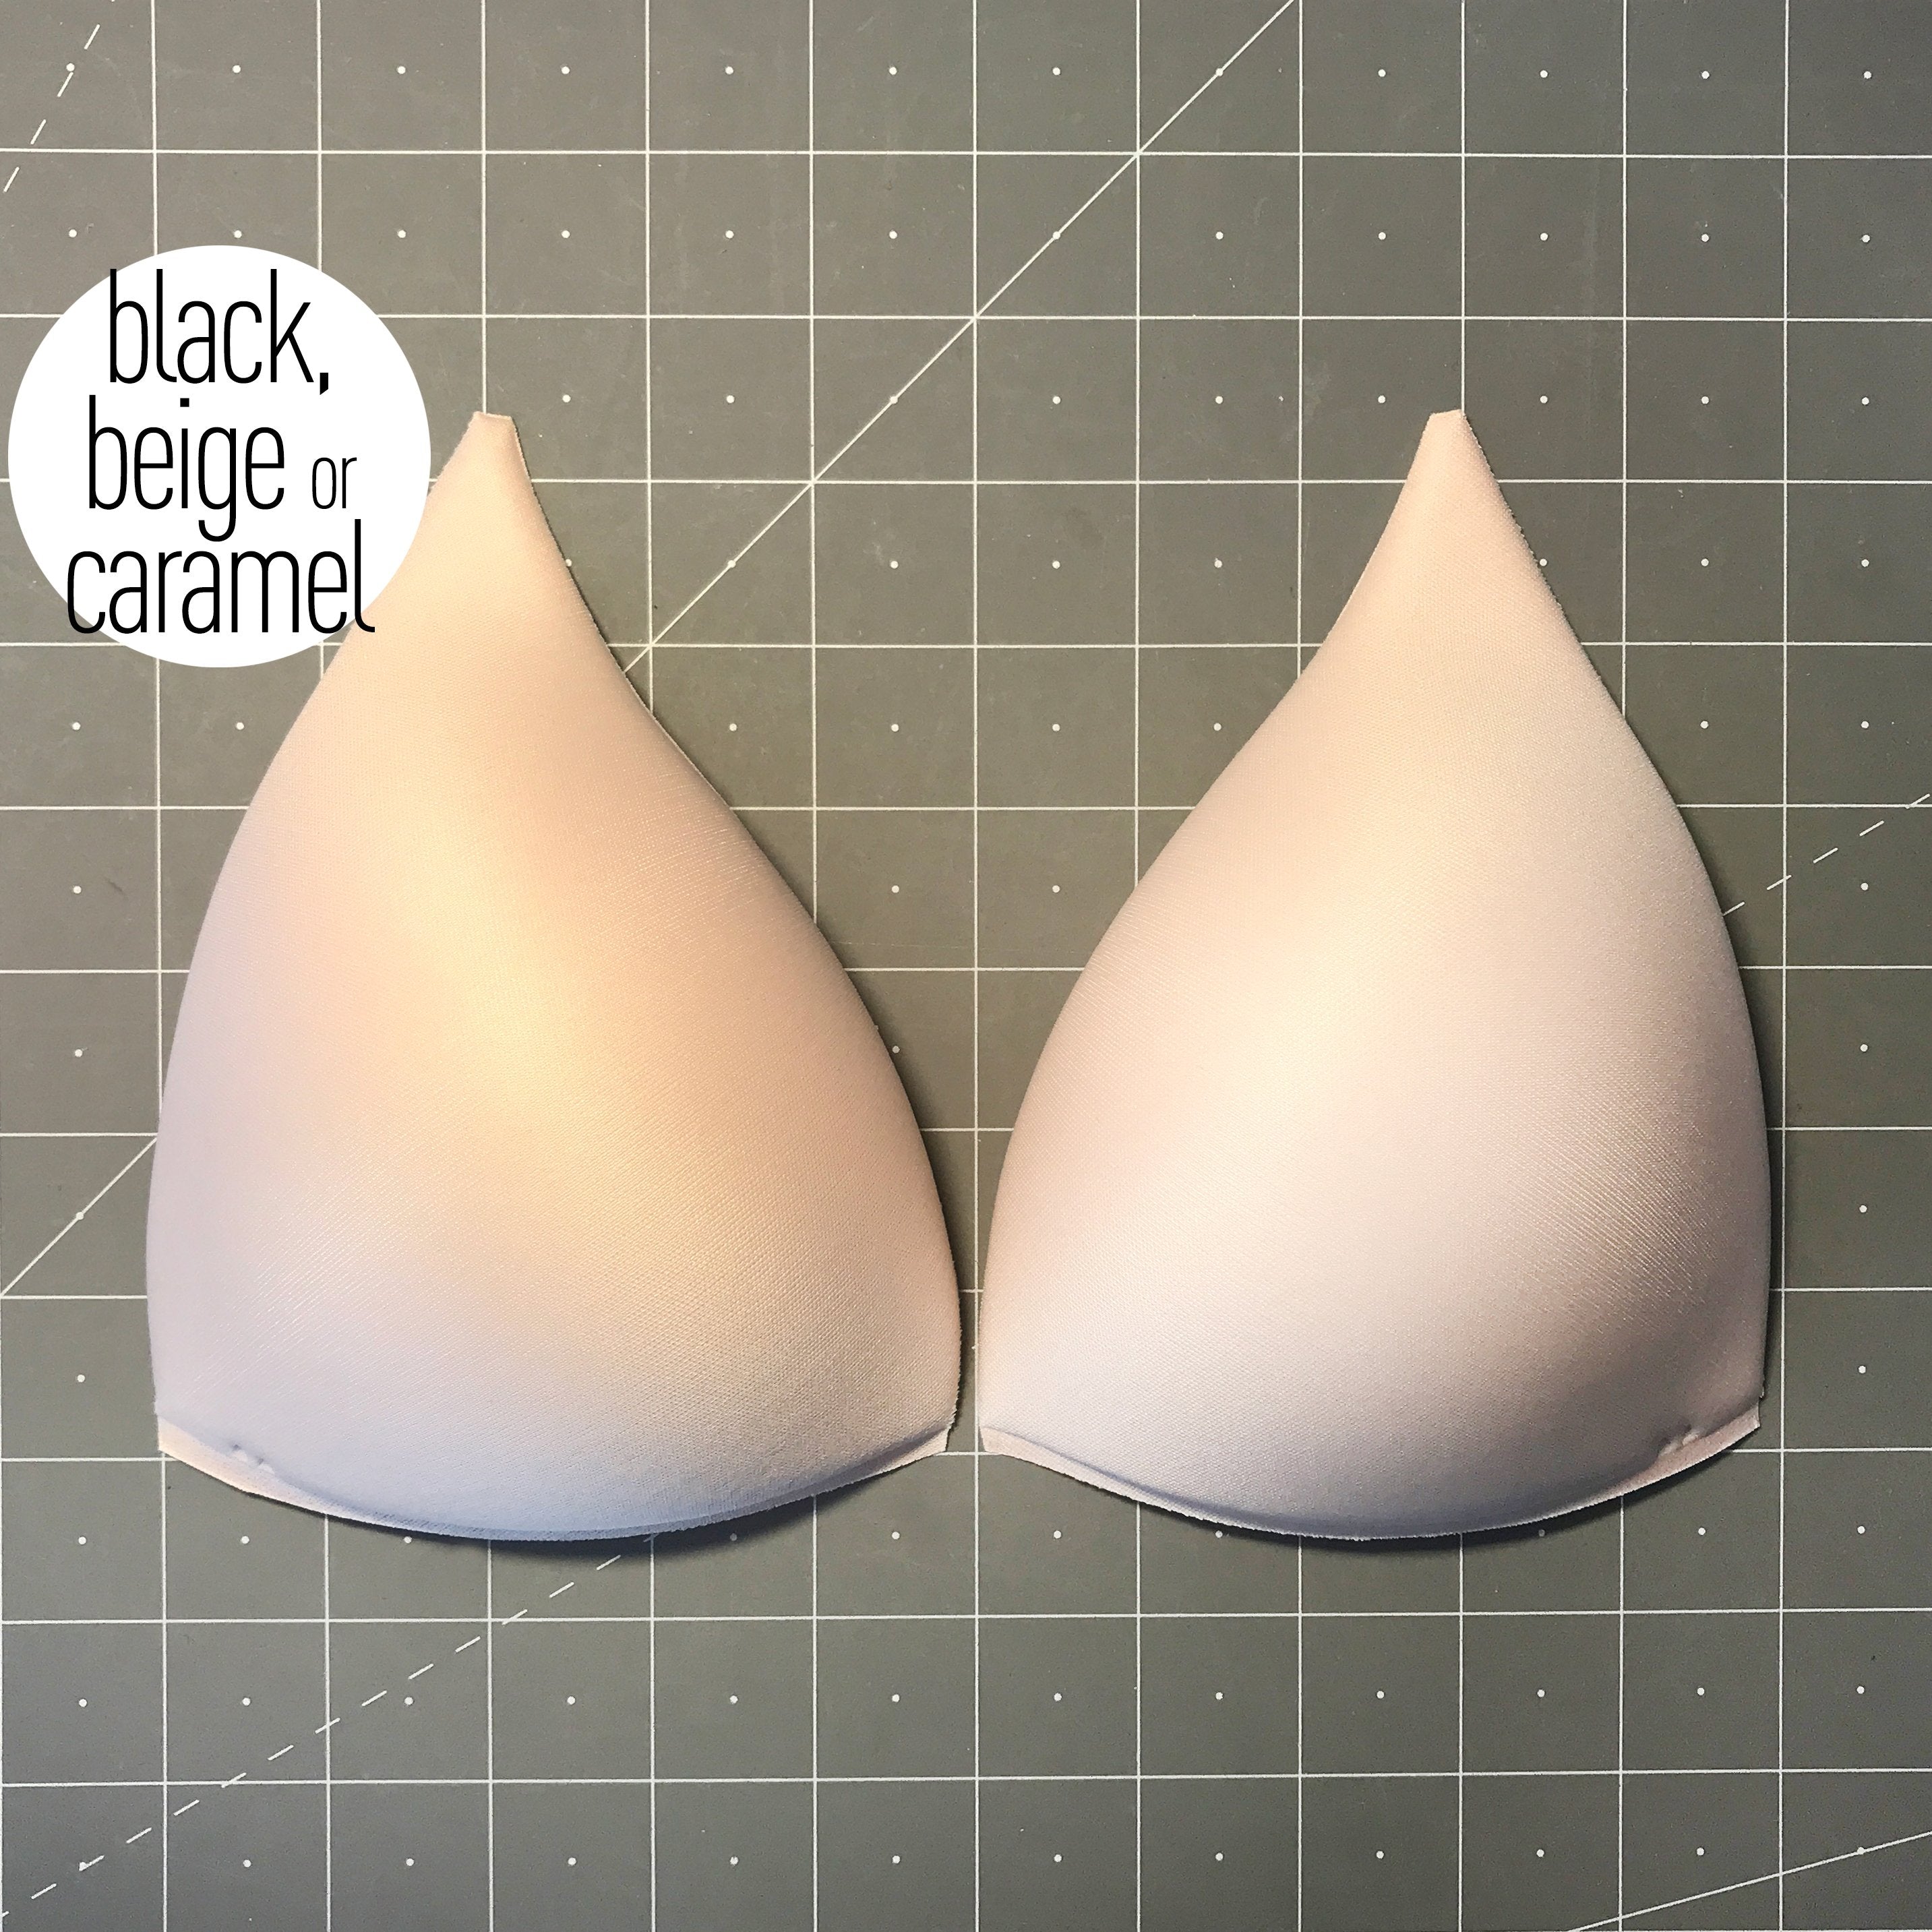 Molded Bra Cups, Long Triangular Shaped, Inserts or Sewn In for